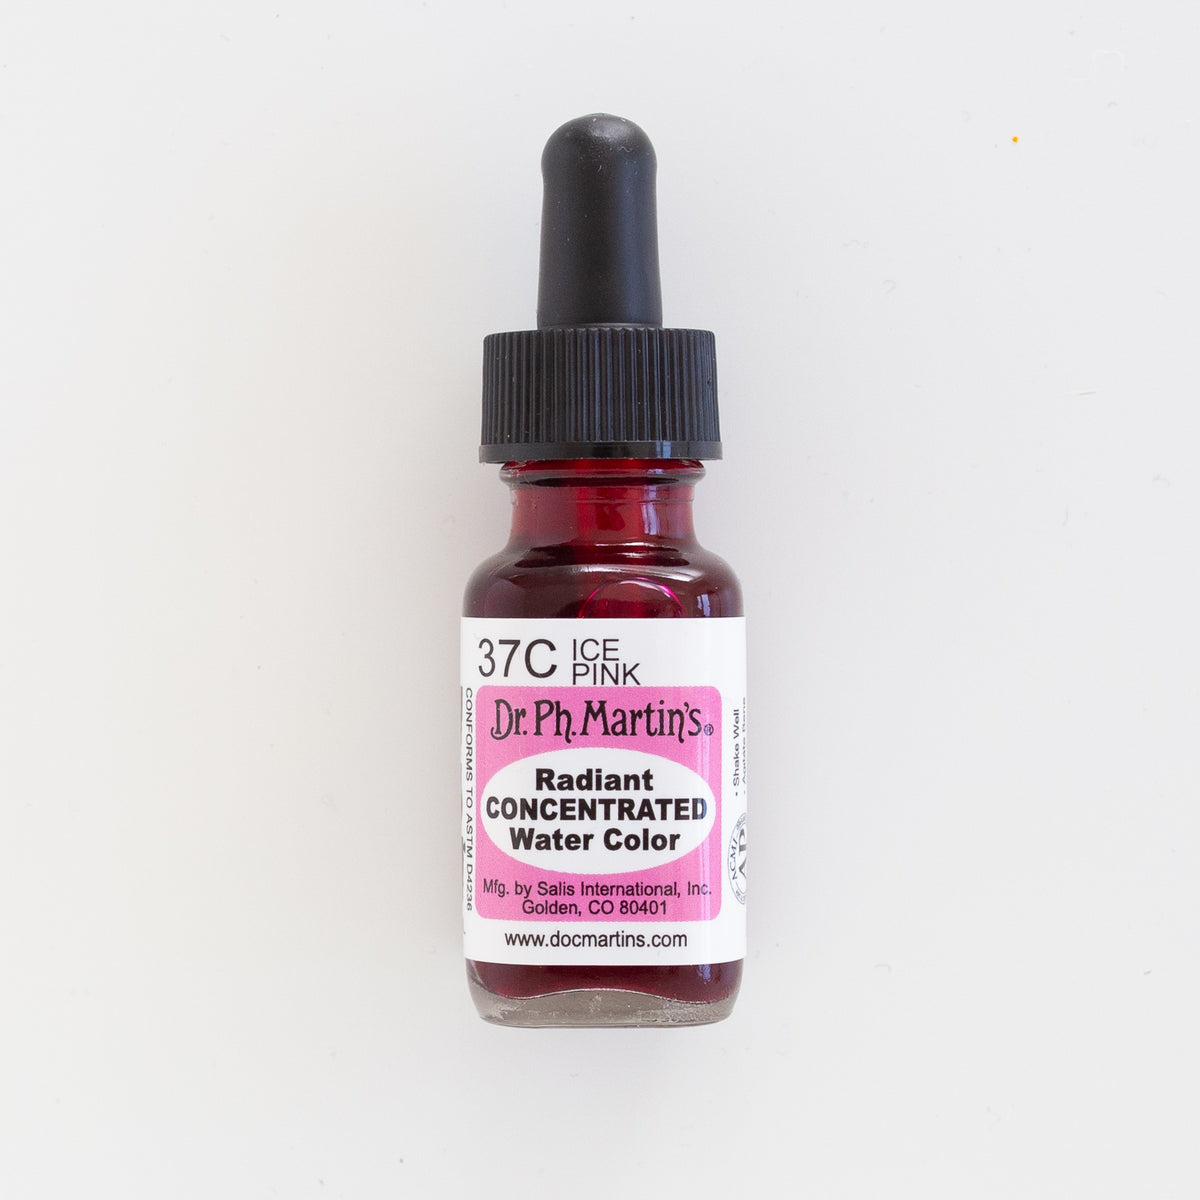 Dr. Ph. Martin’s Radiant Concentrated 37C Ice Pink